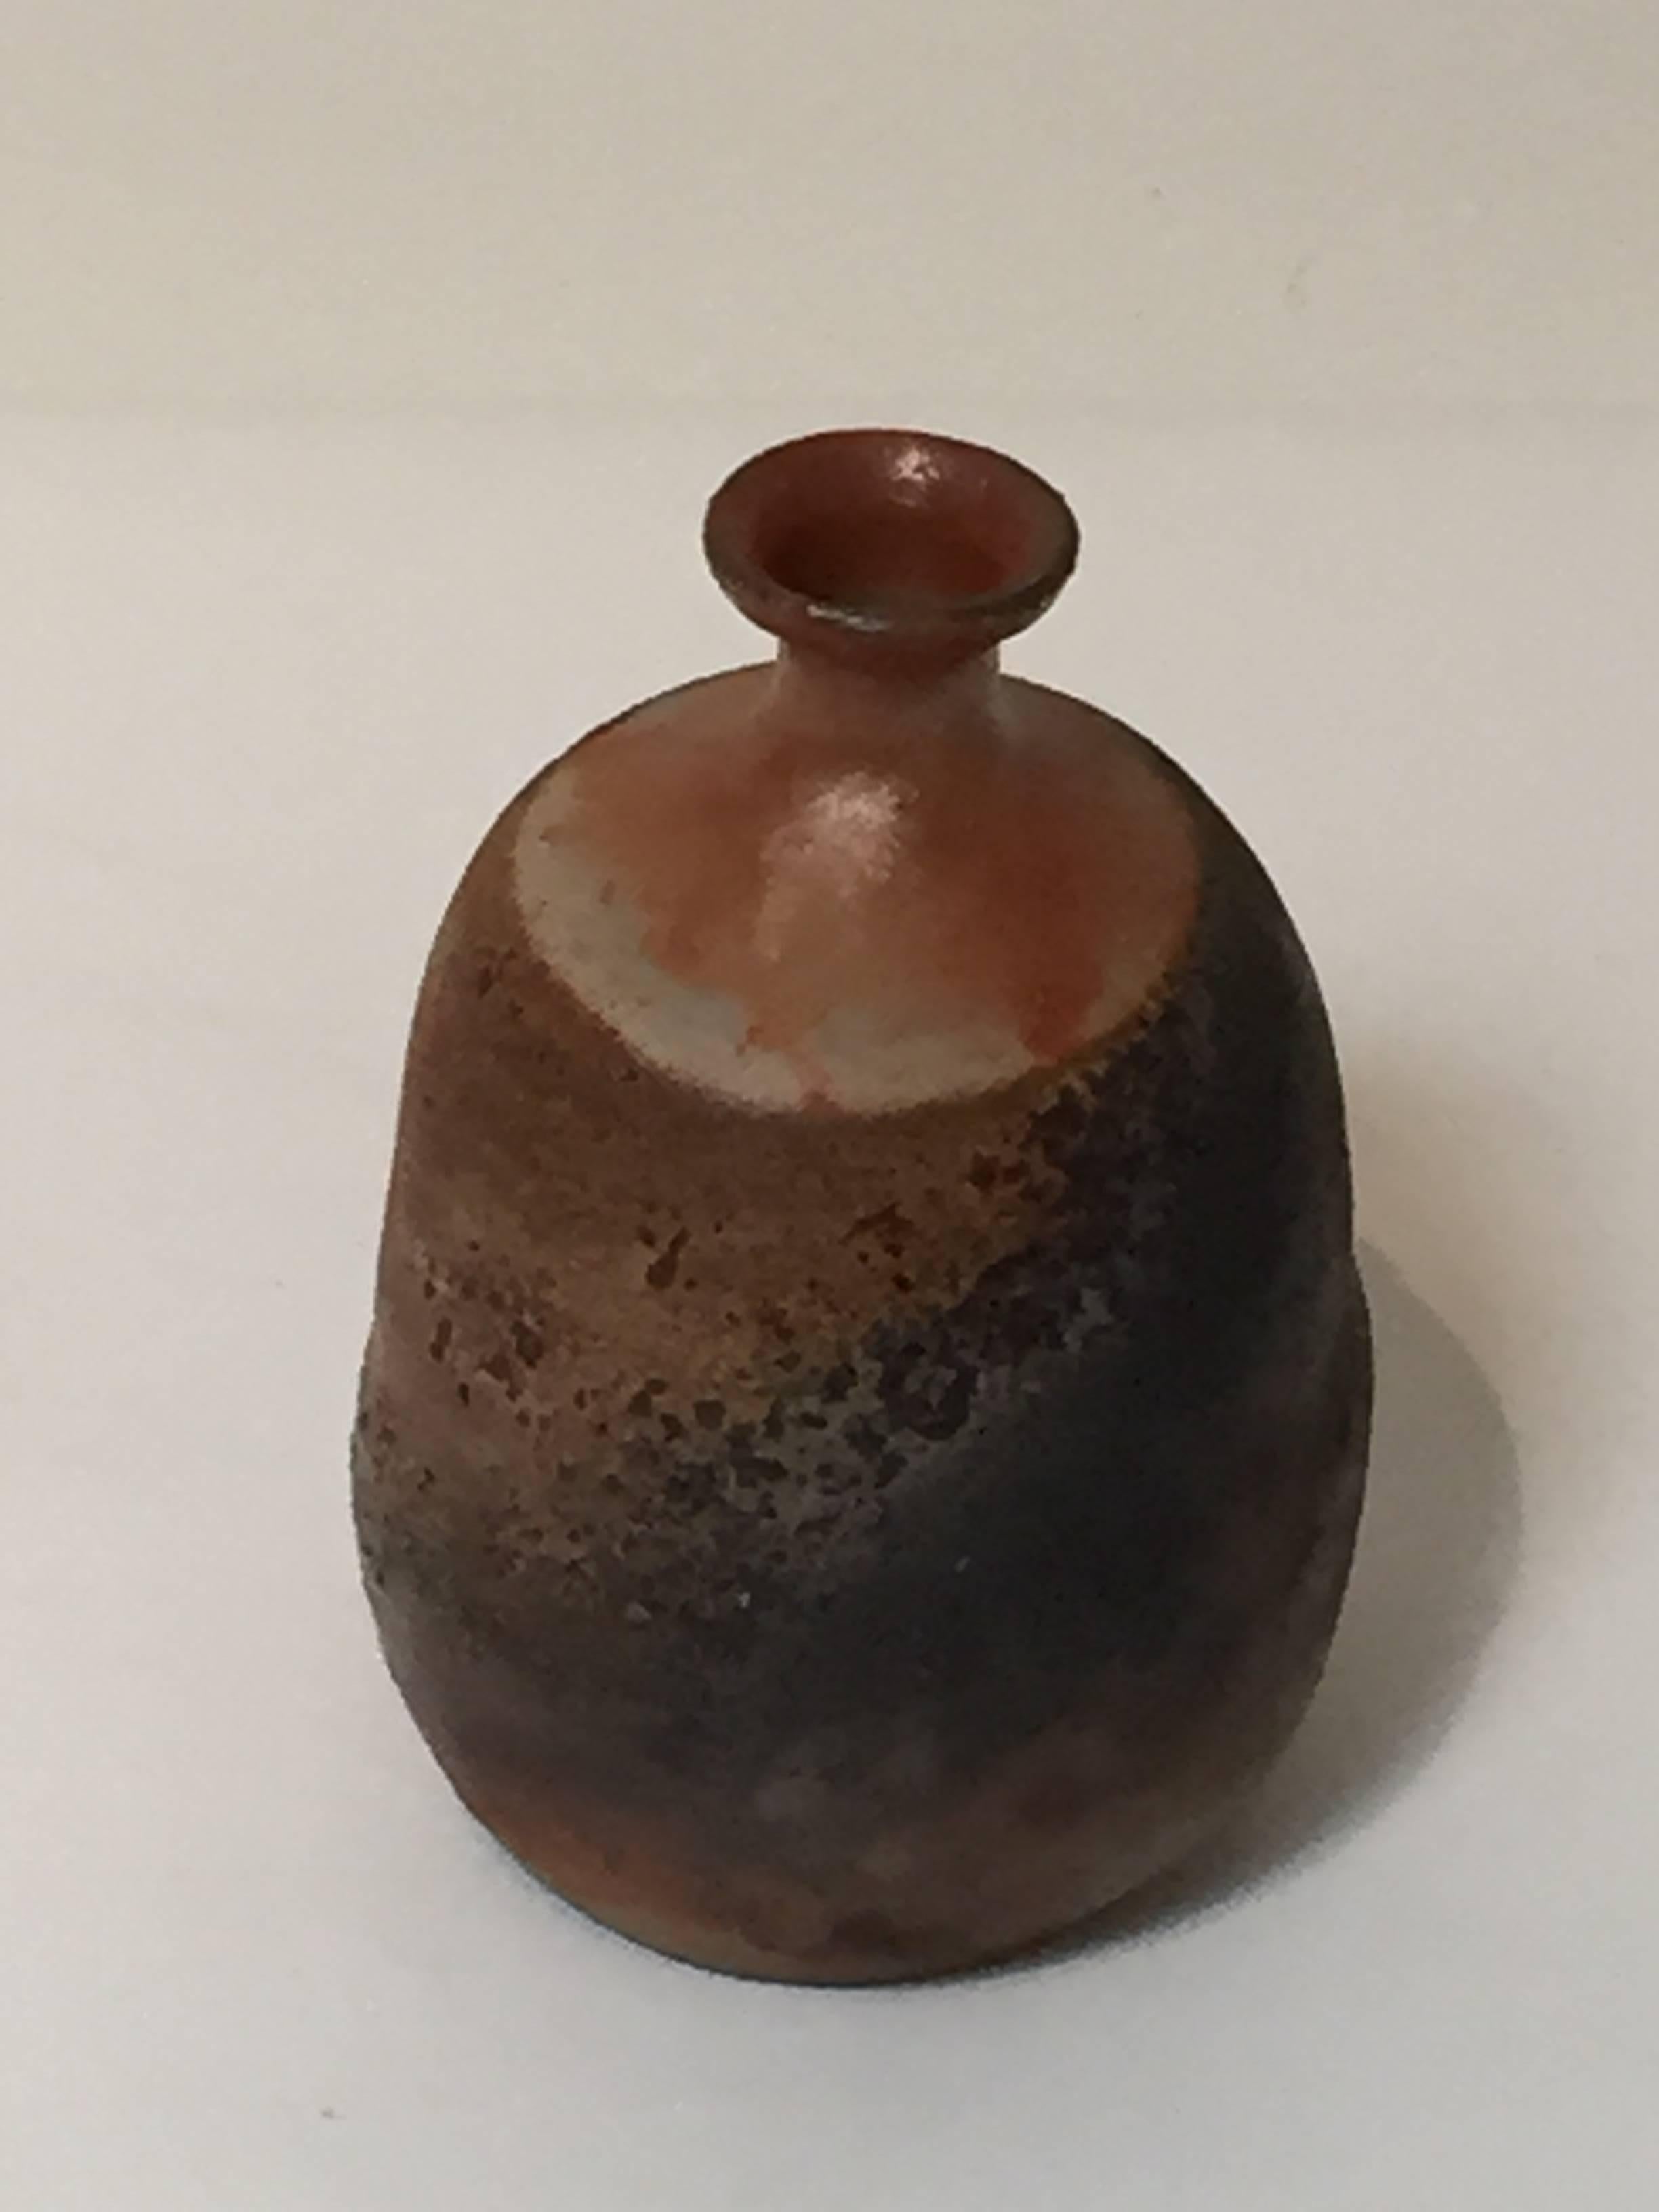 
A contemporary study of the ancient style of Old Bizen ceramics.
Wood fired with natural ash glaze effects.
This sake flask is made by Horoyuki Wakimoto (b. 1952).
With a signed box.